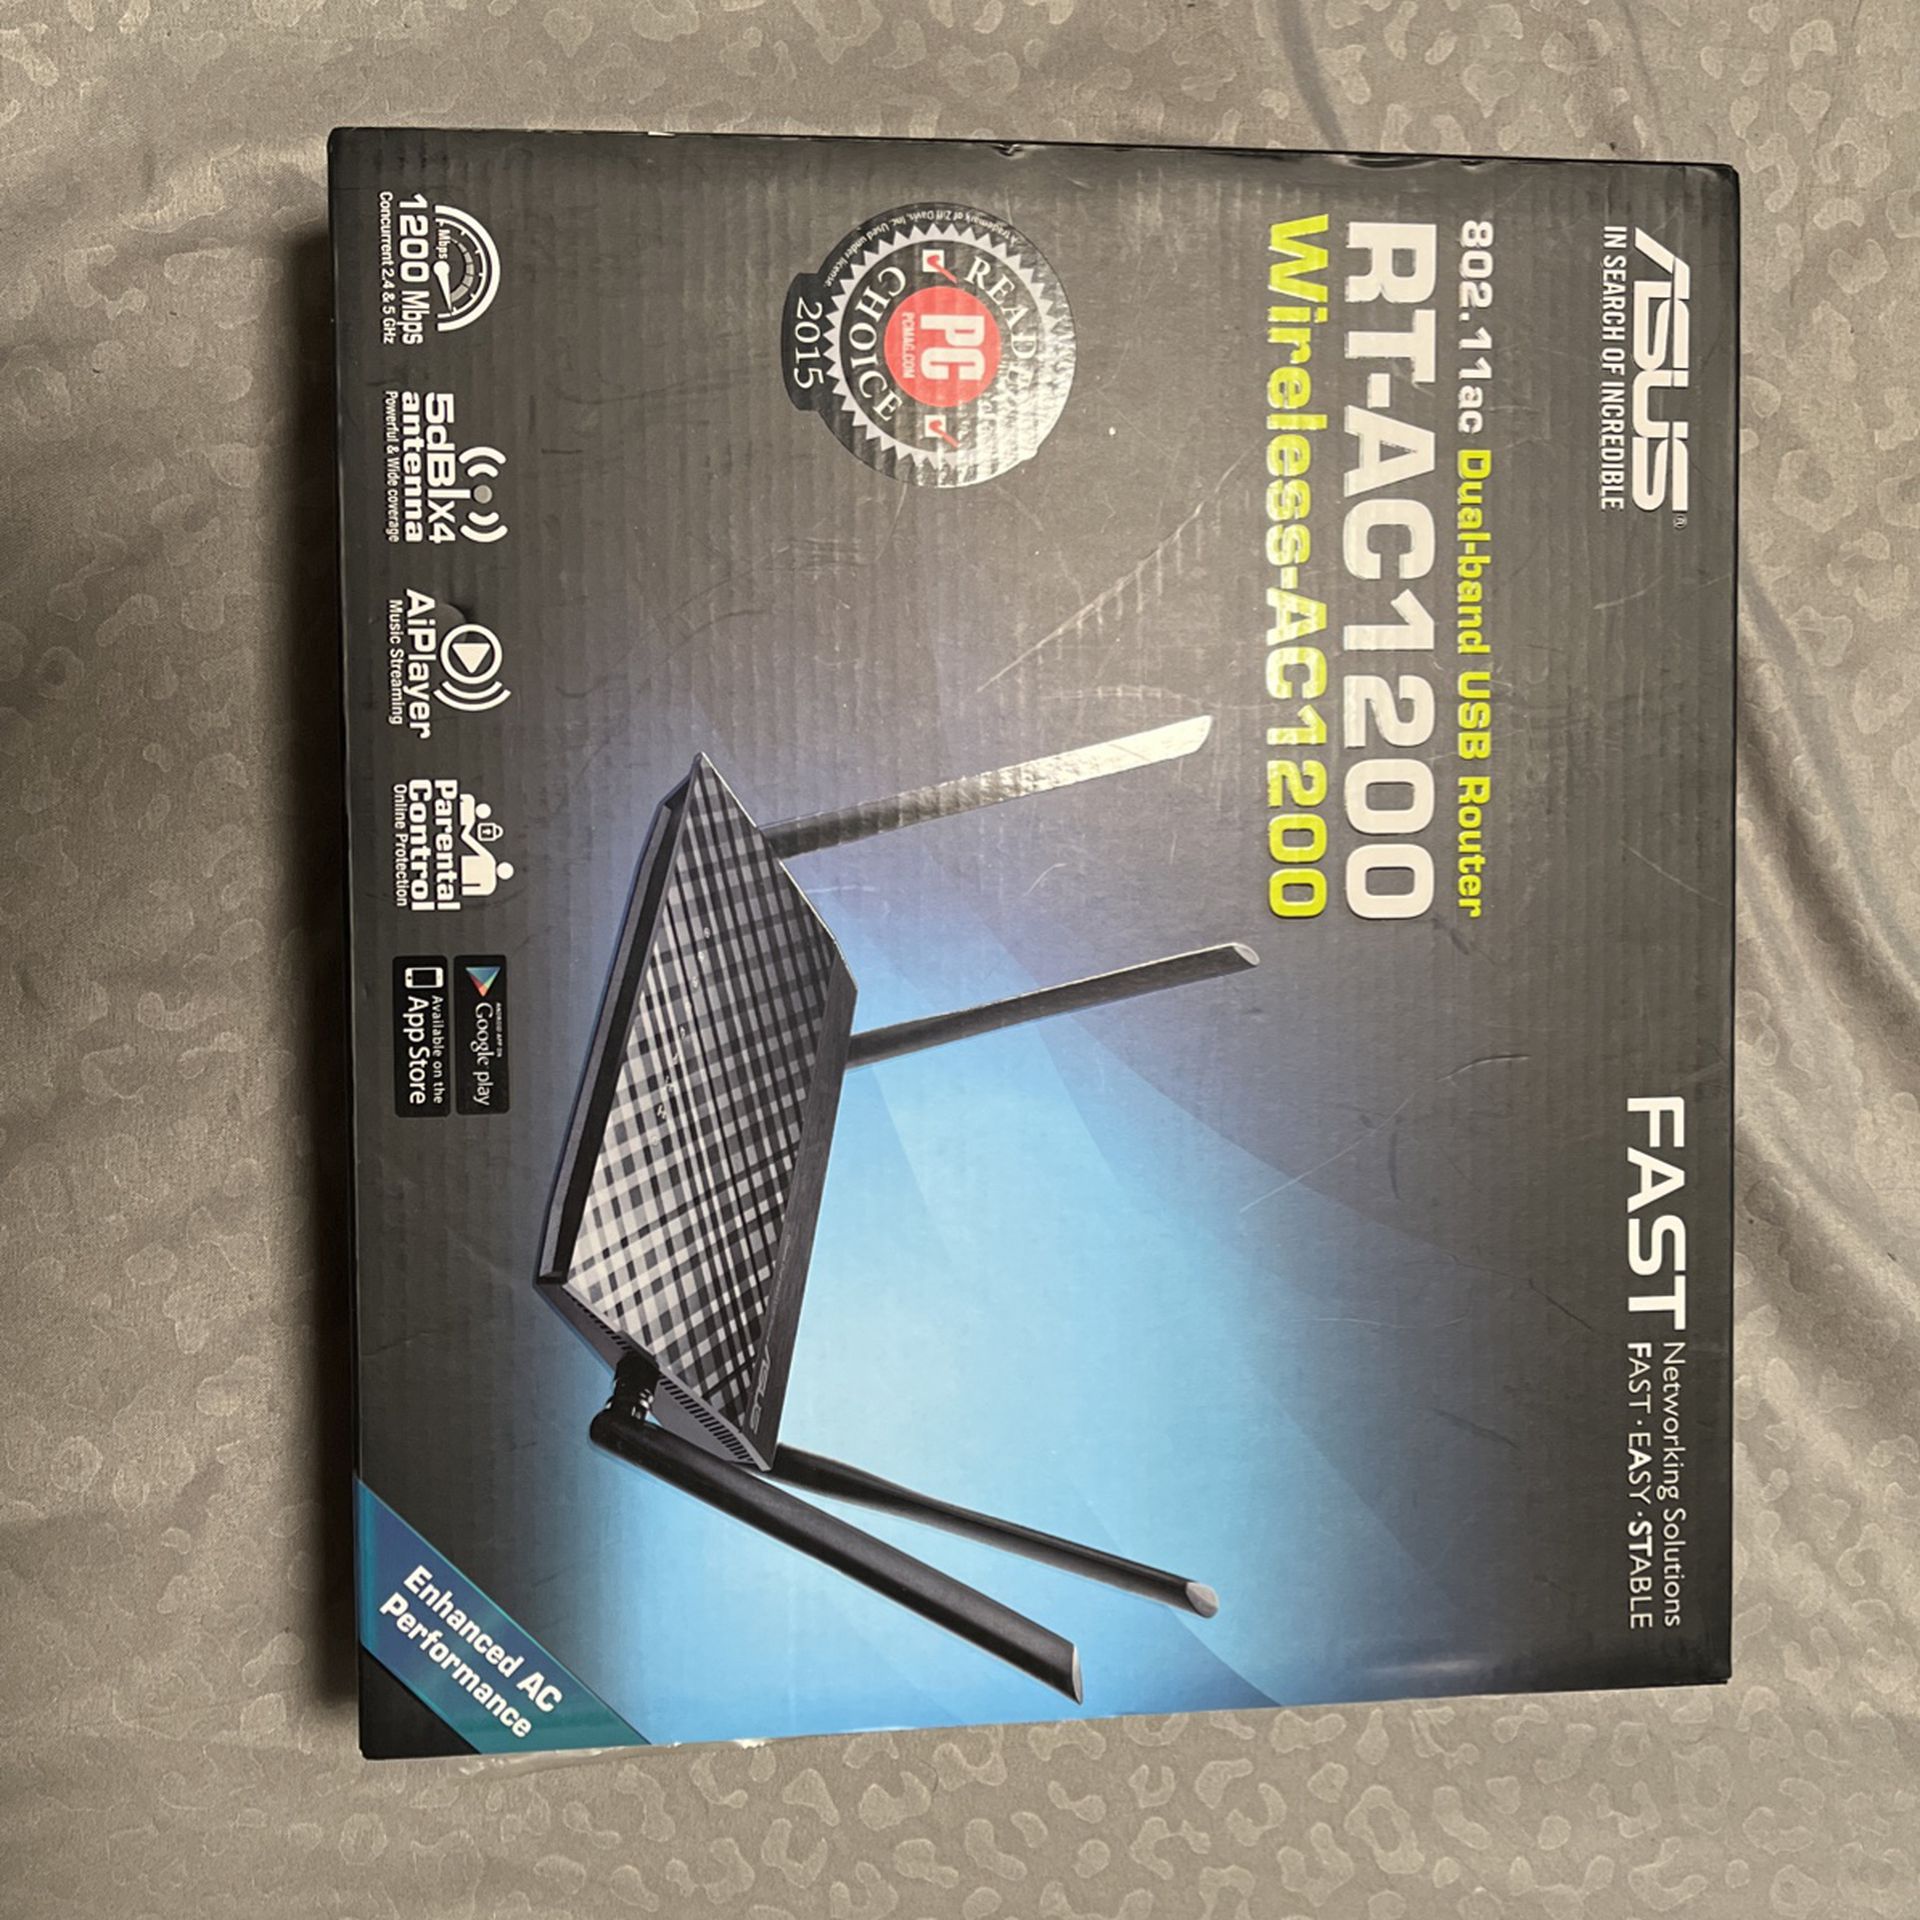 Asus RT-AC 1200 Wireless Router